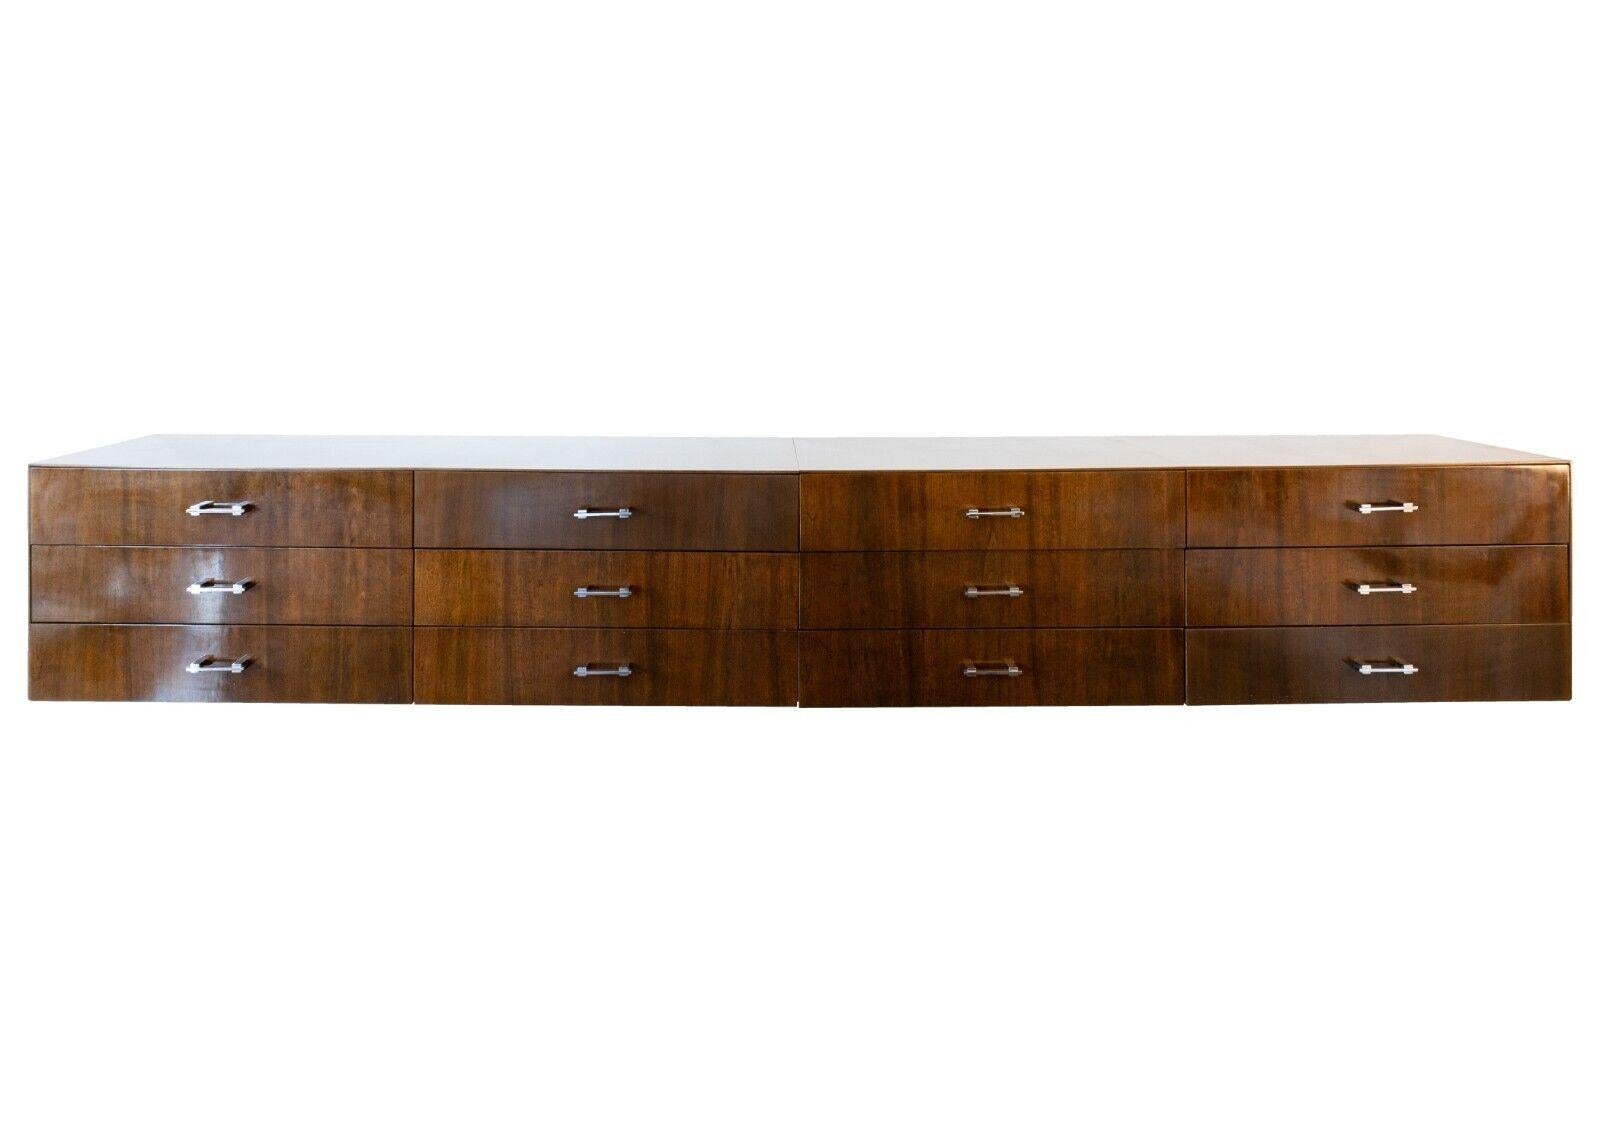 A gorgeous 3 piece walnut and chrome Tobocman hanging/floating credenza set. This stunning wall unit set features a walnut construction with a semi-glossy finish, and rectangular chrome drawer handles. This set of 3 comes unattached but can be hung